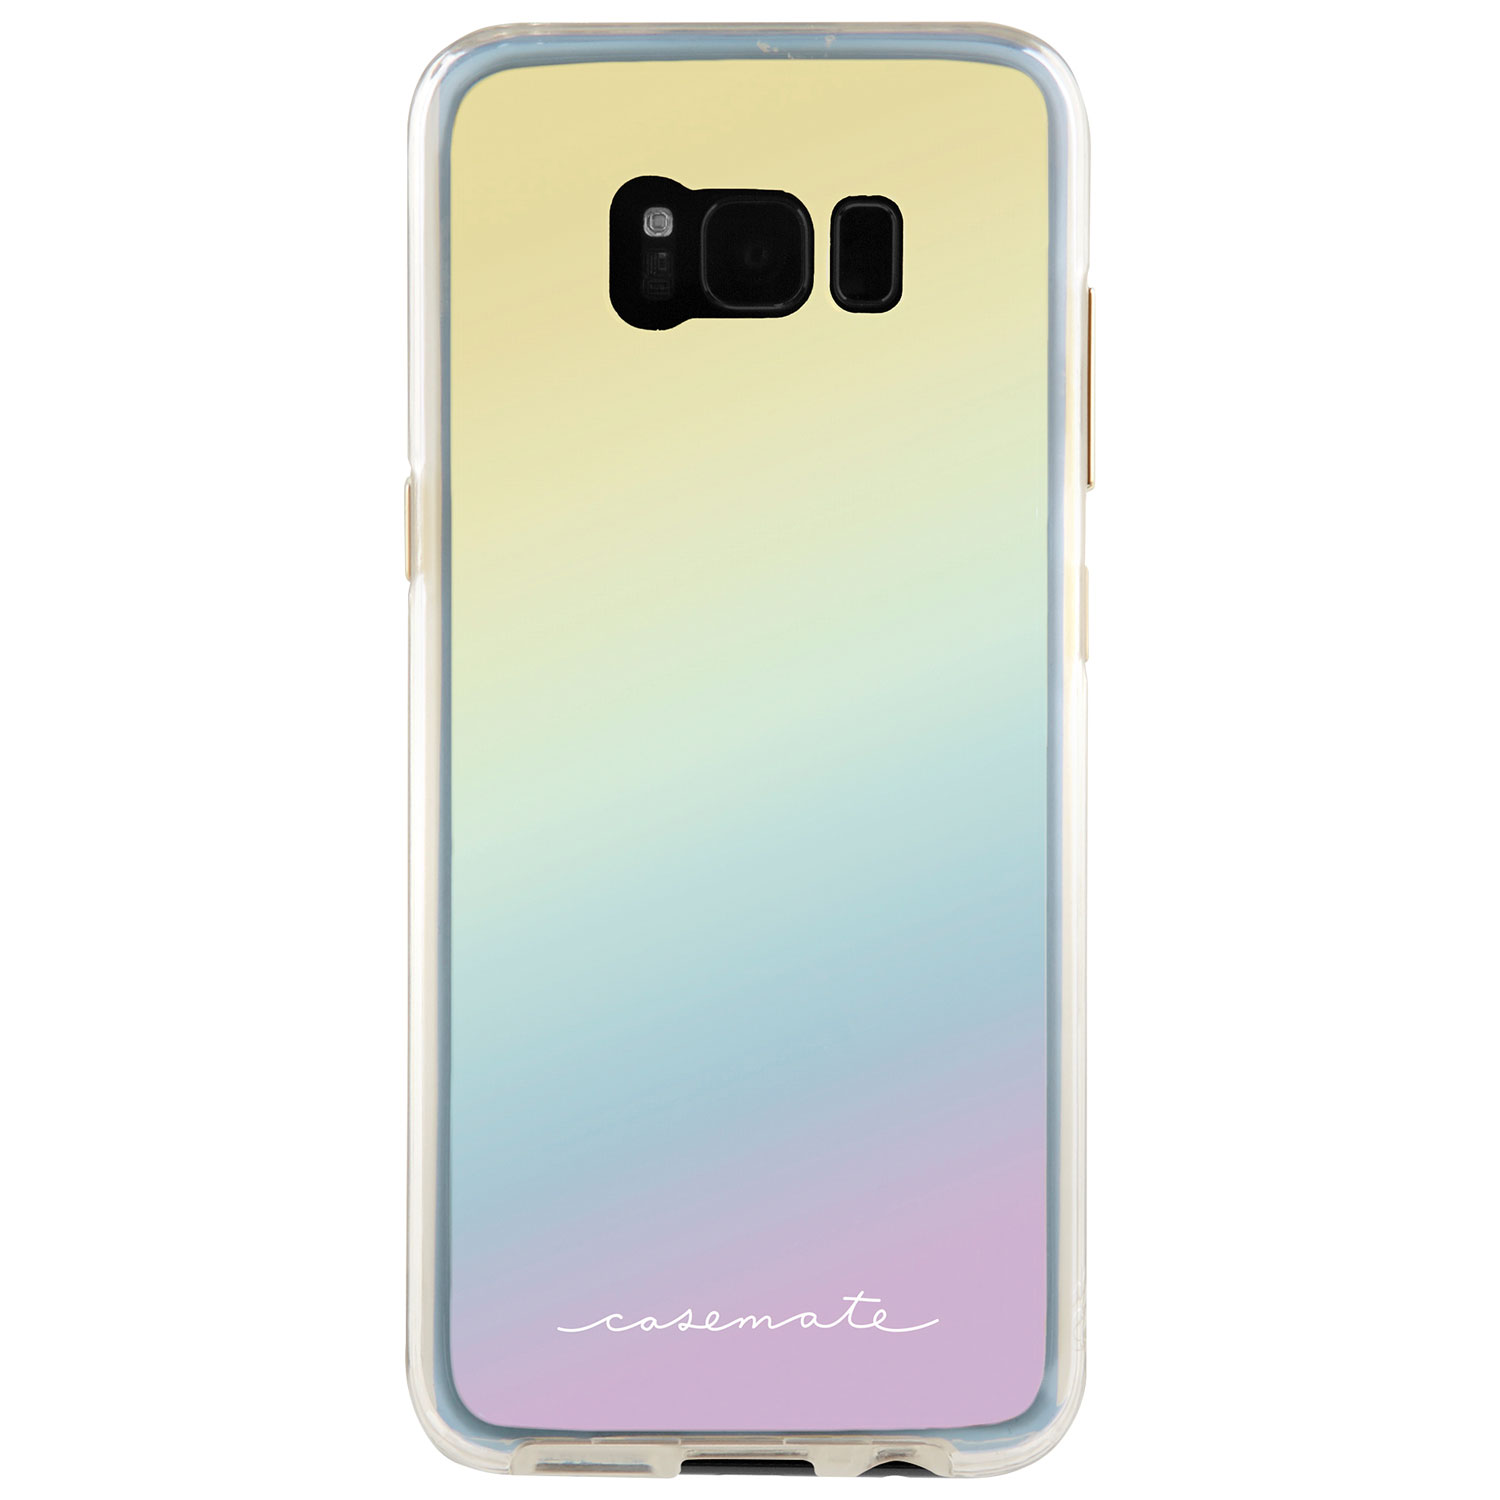 Case-Mate Naked Tough Fitted Hard Shell Case for Galaxy S8+ (Plus) - Iridescent